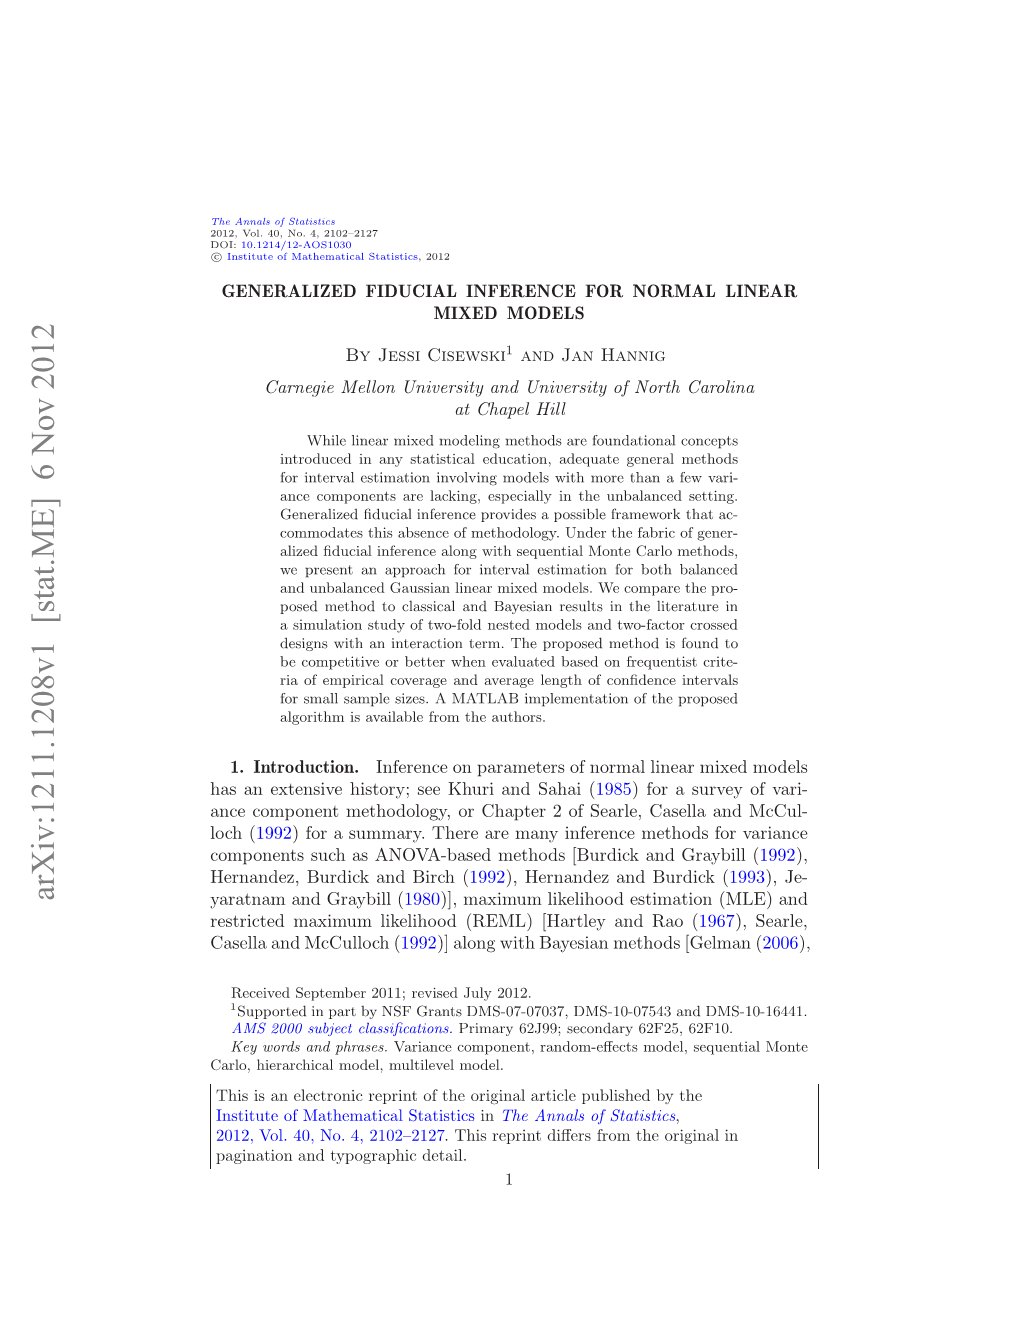 Generalized Fiducial Inference for Normal Linear Mixed Models